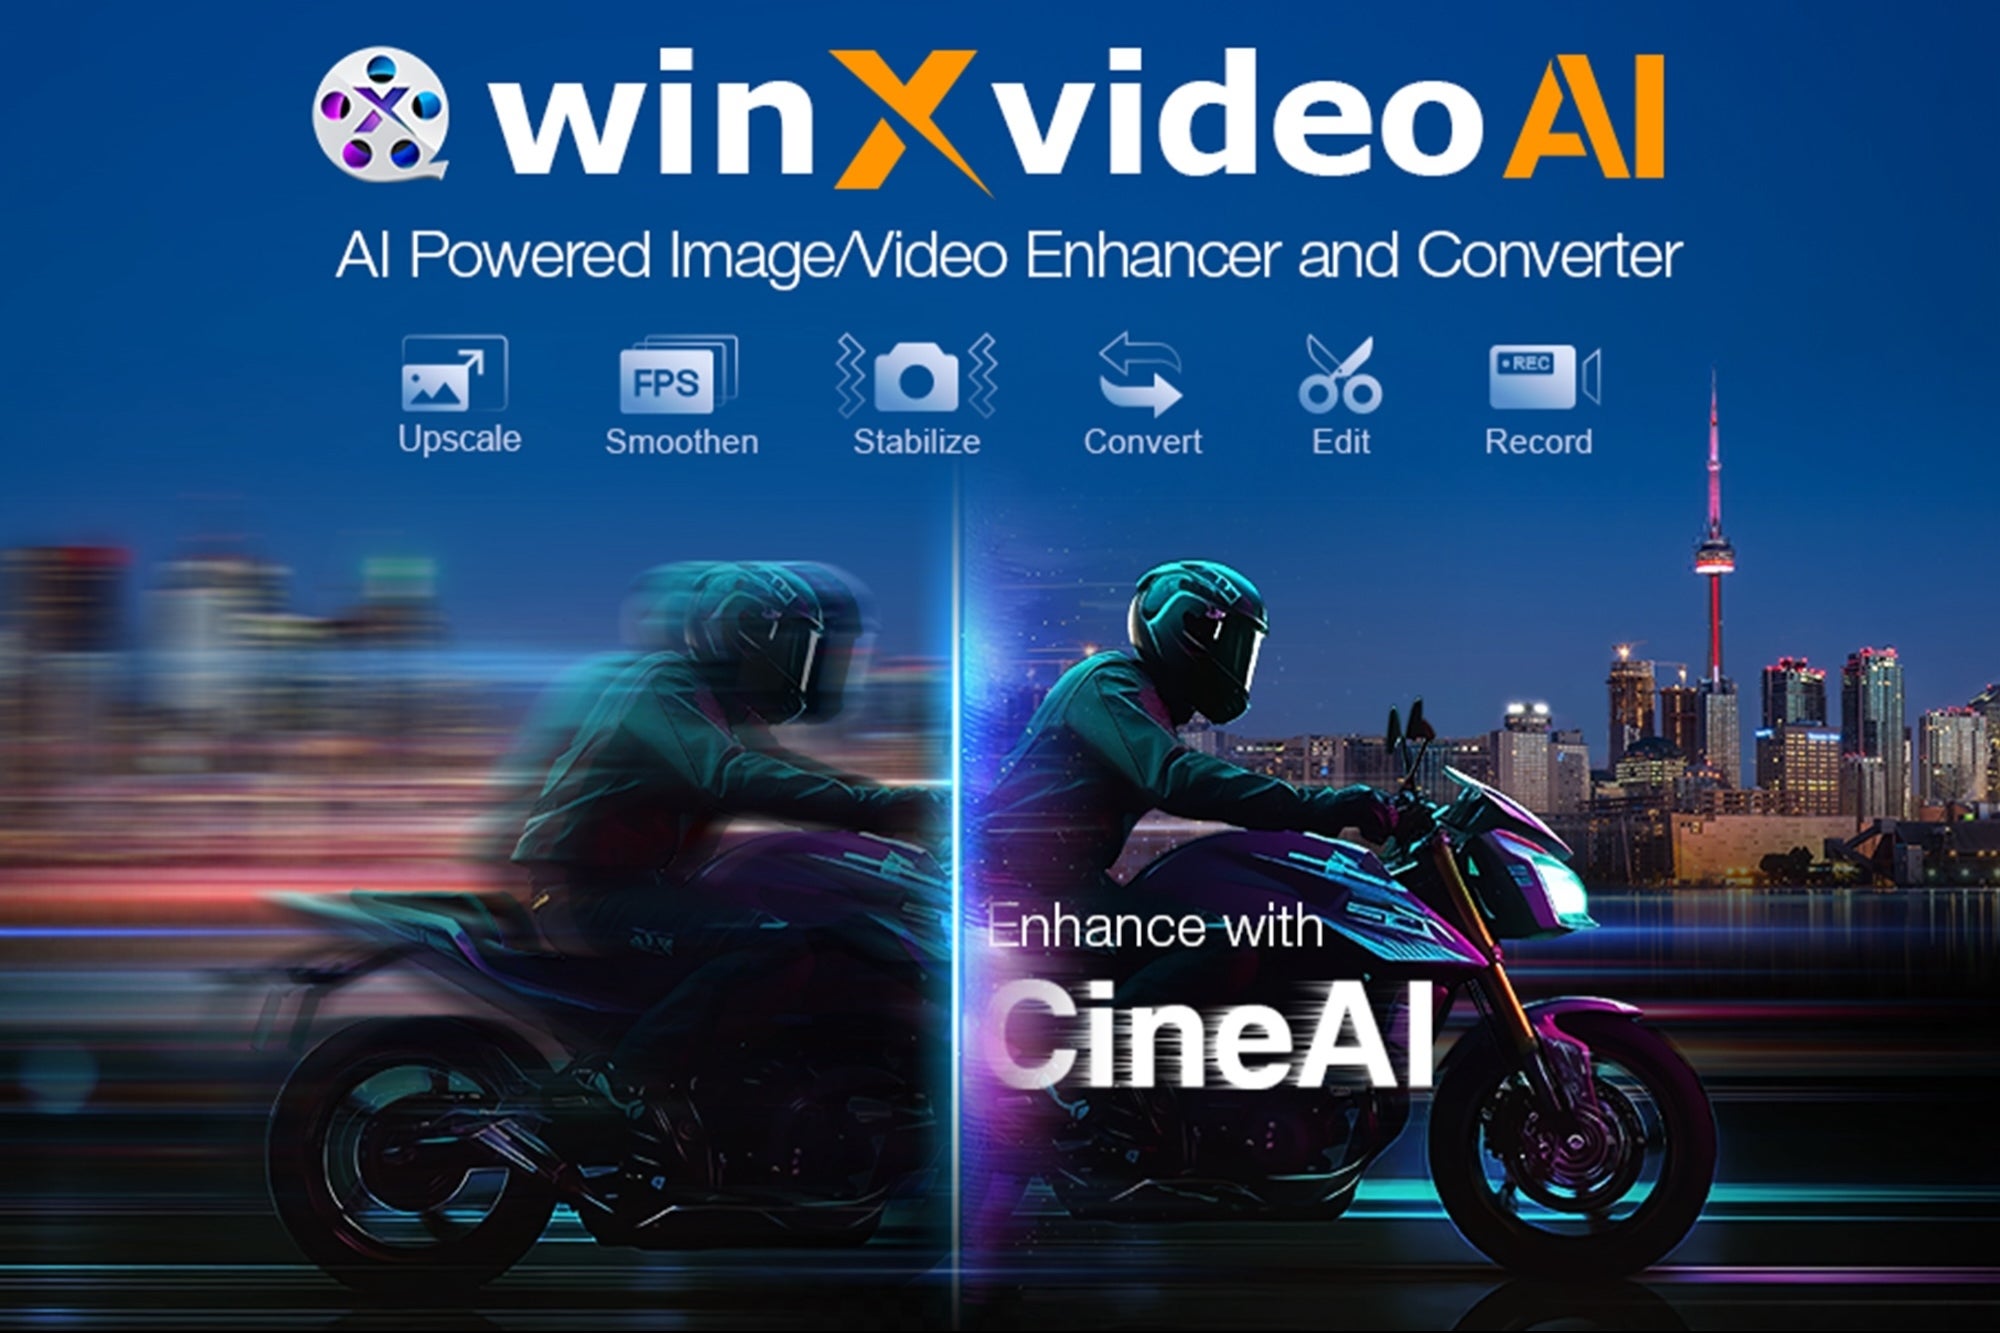 Save an Extra 20% on This AI-Powered Video Editing Tool